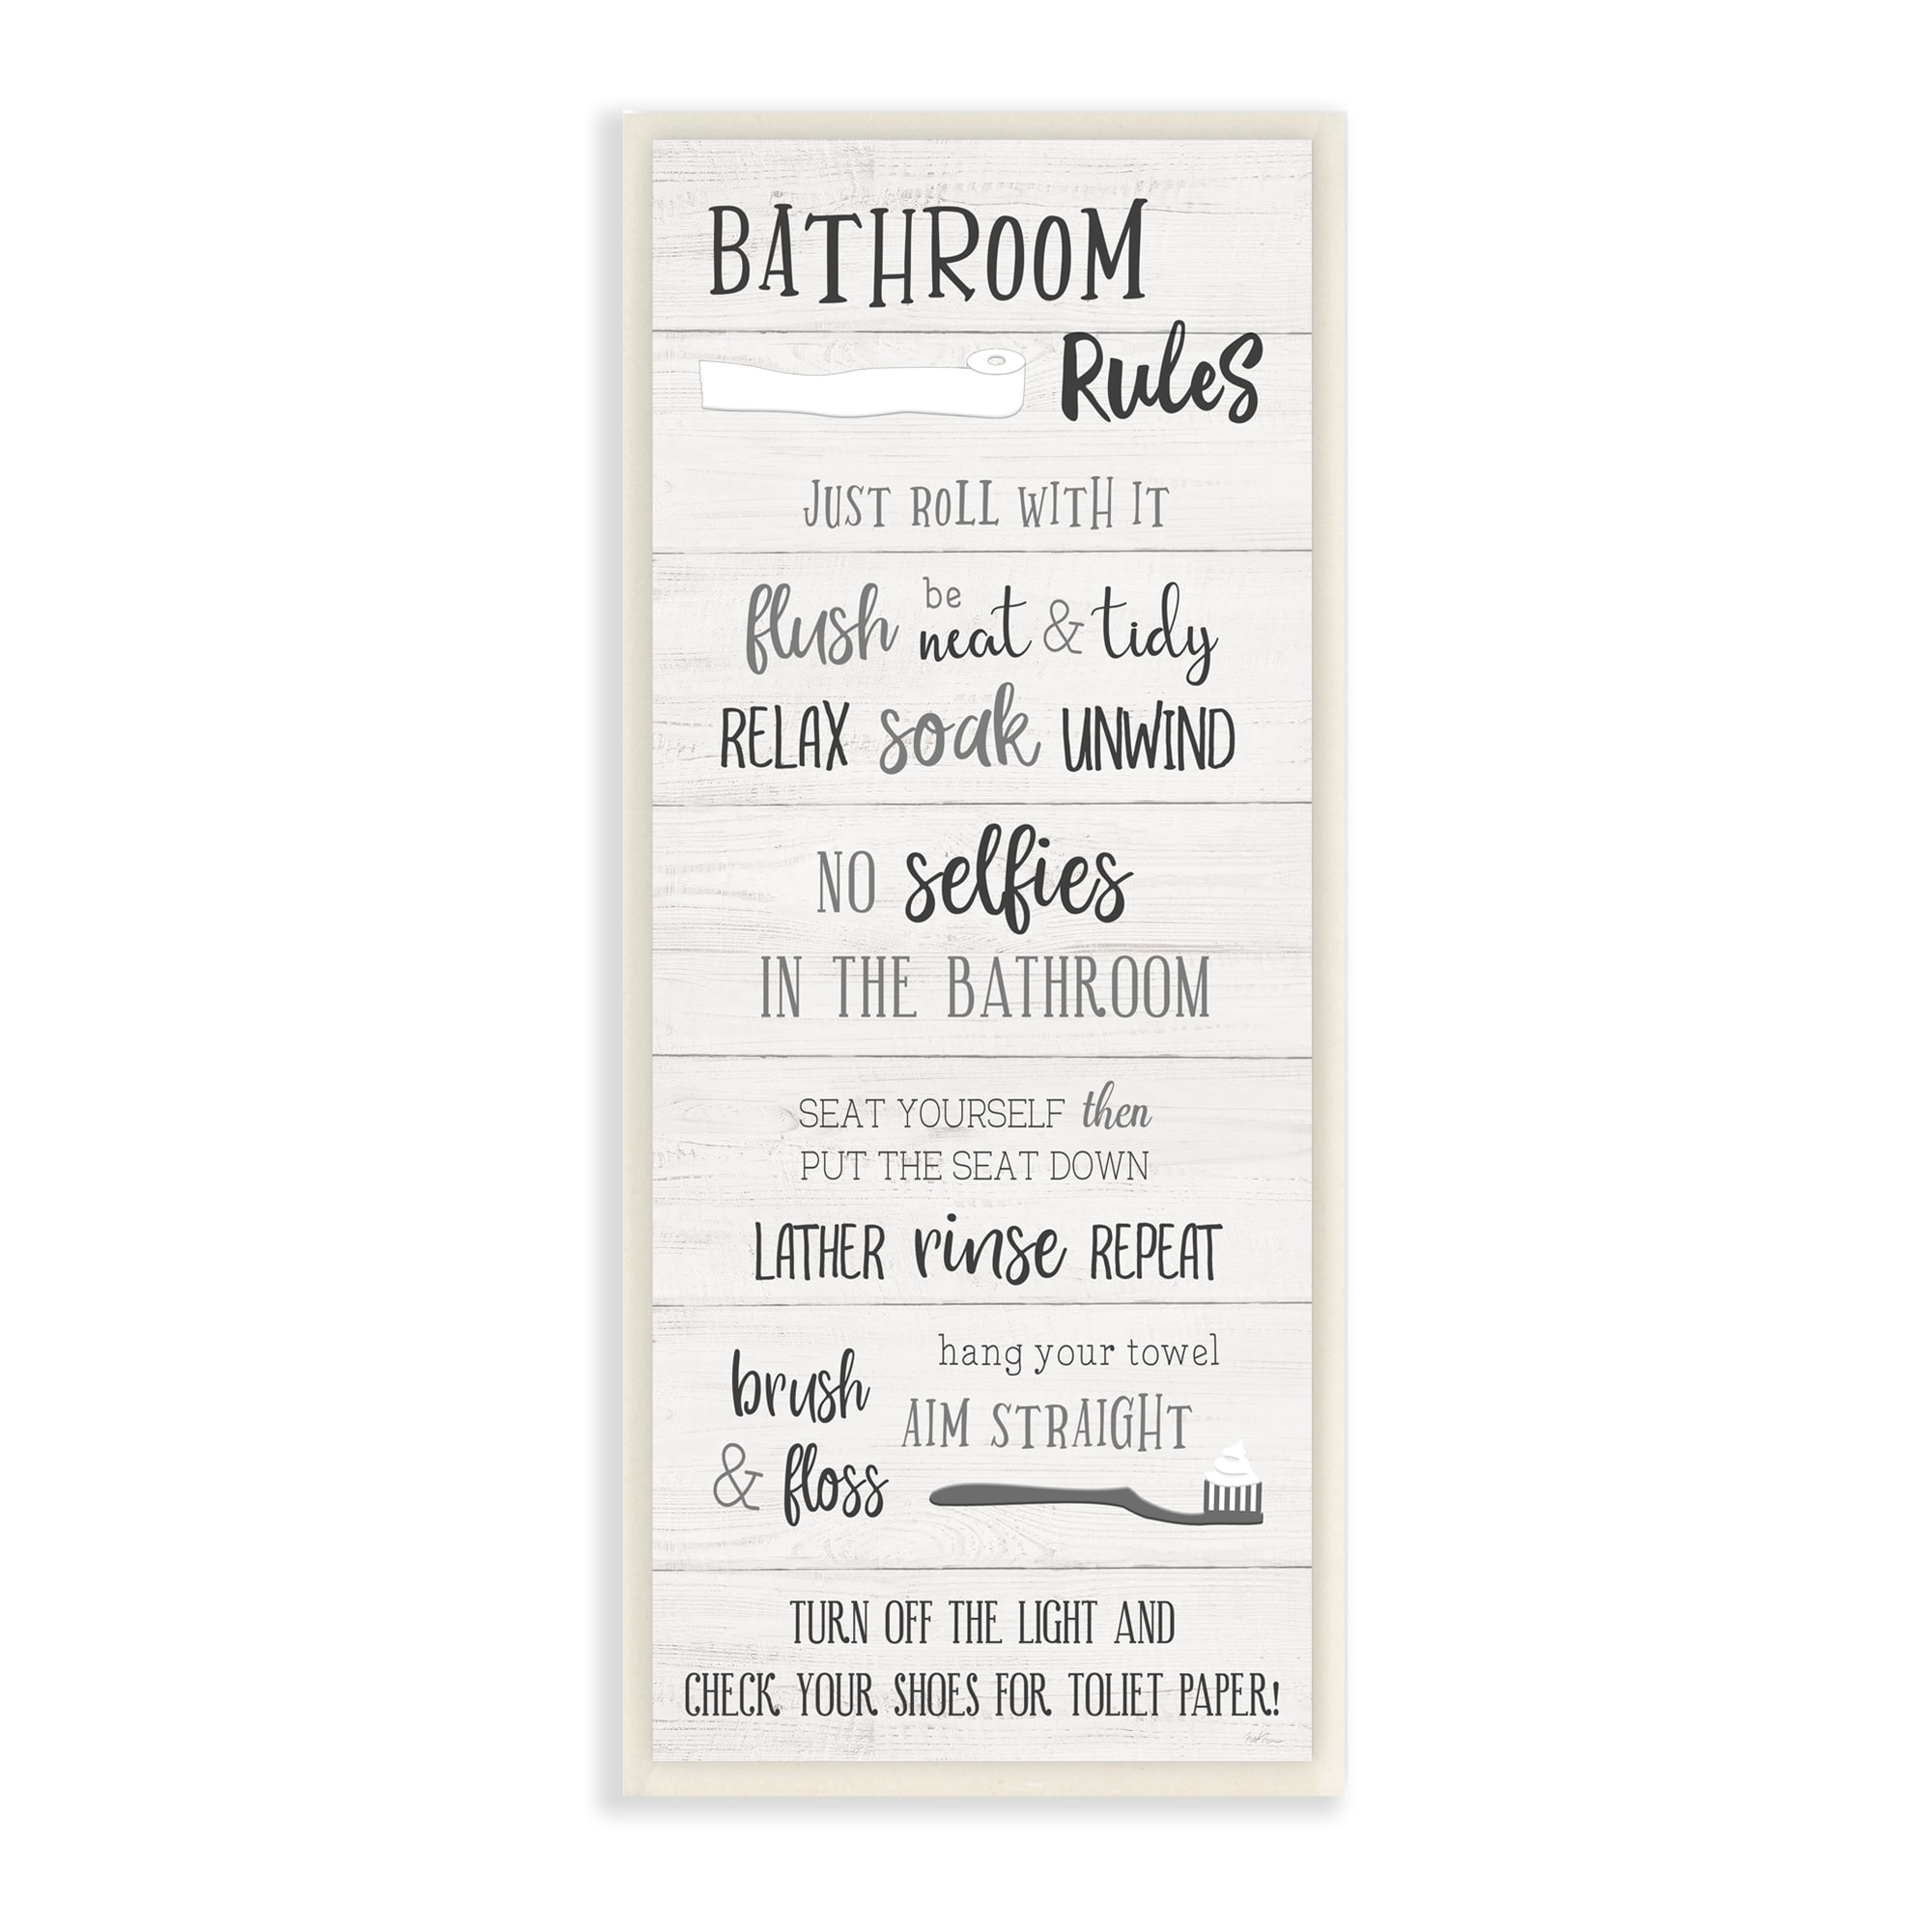 Bathroom Rules Sign Toilet Paper Fun Phrases Natalie Carpentieri 17-in H x 7-in W Bath Print on Canvas in Gray | - Stupell Industries AF-567-WD-7X17